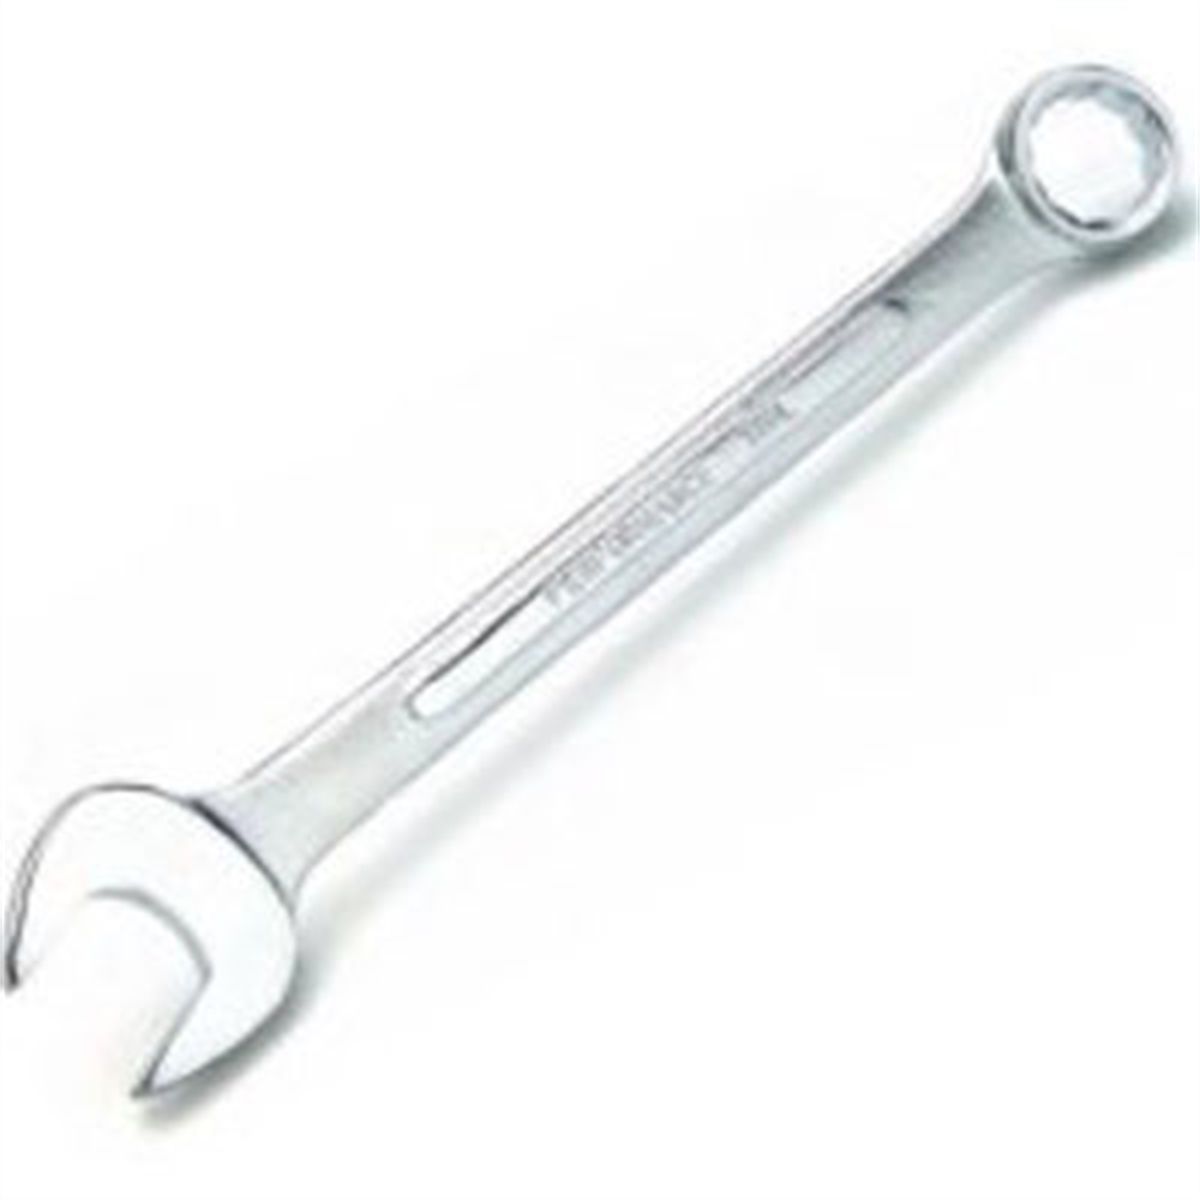 9/16" SAE Comb Wrench